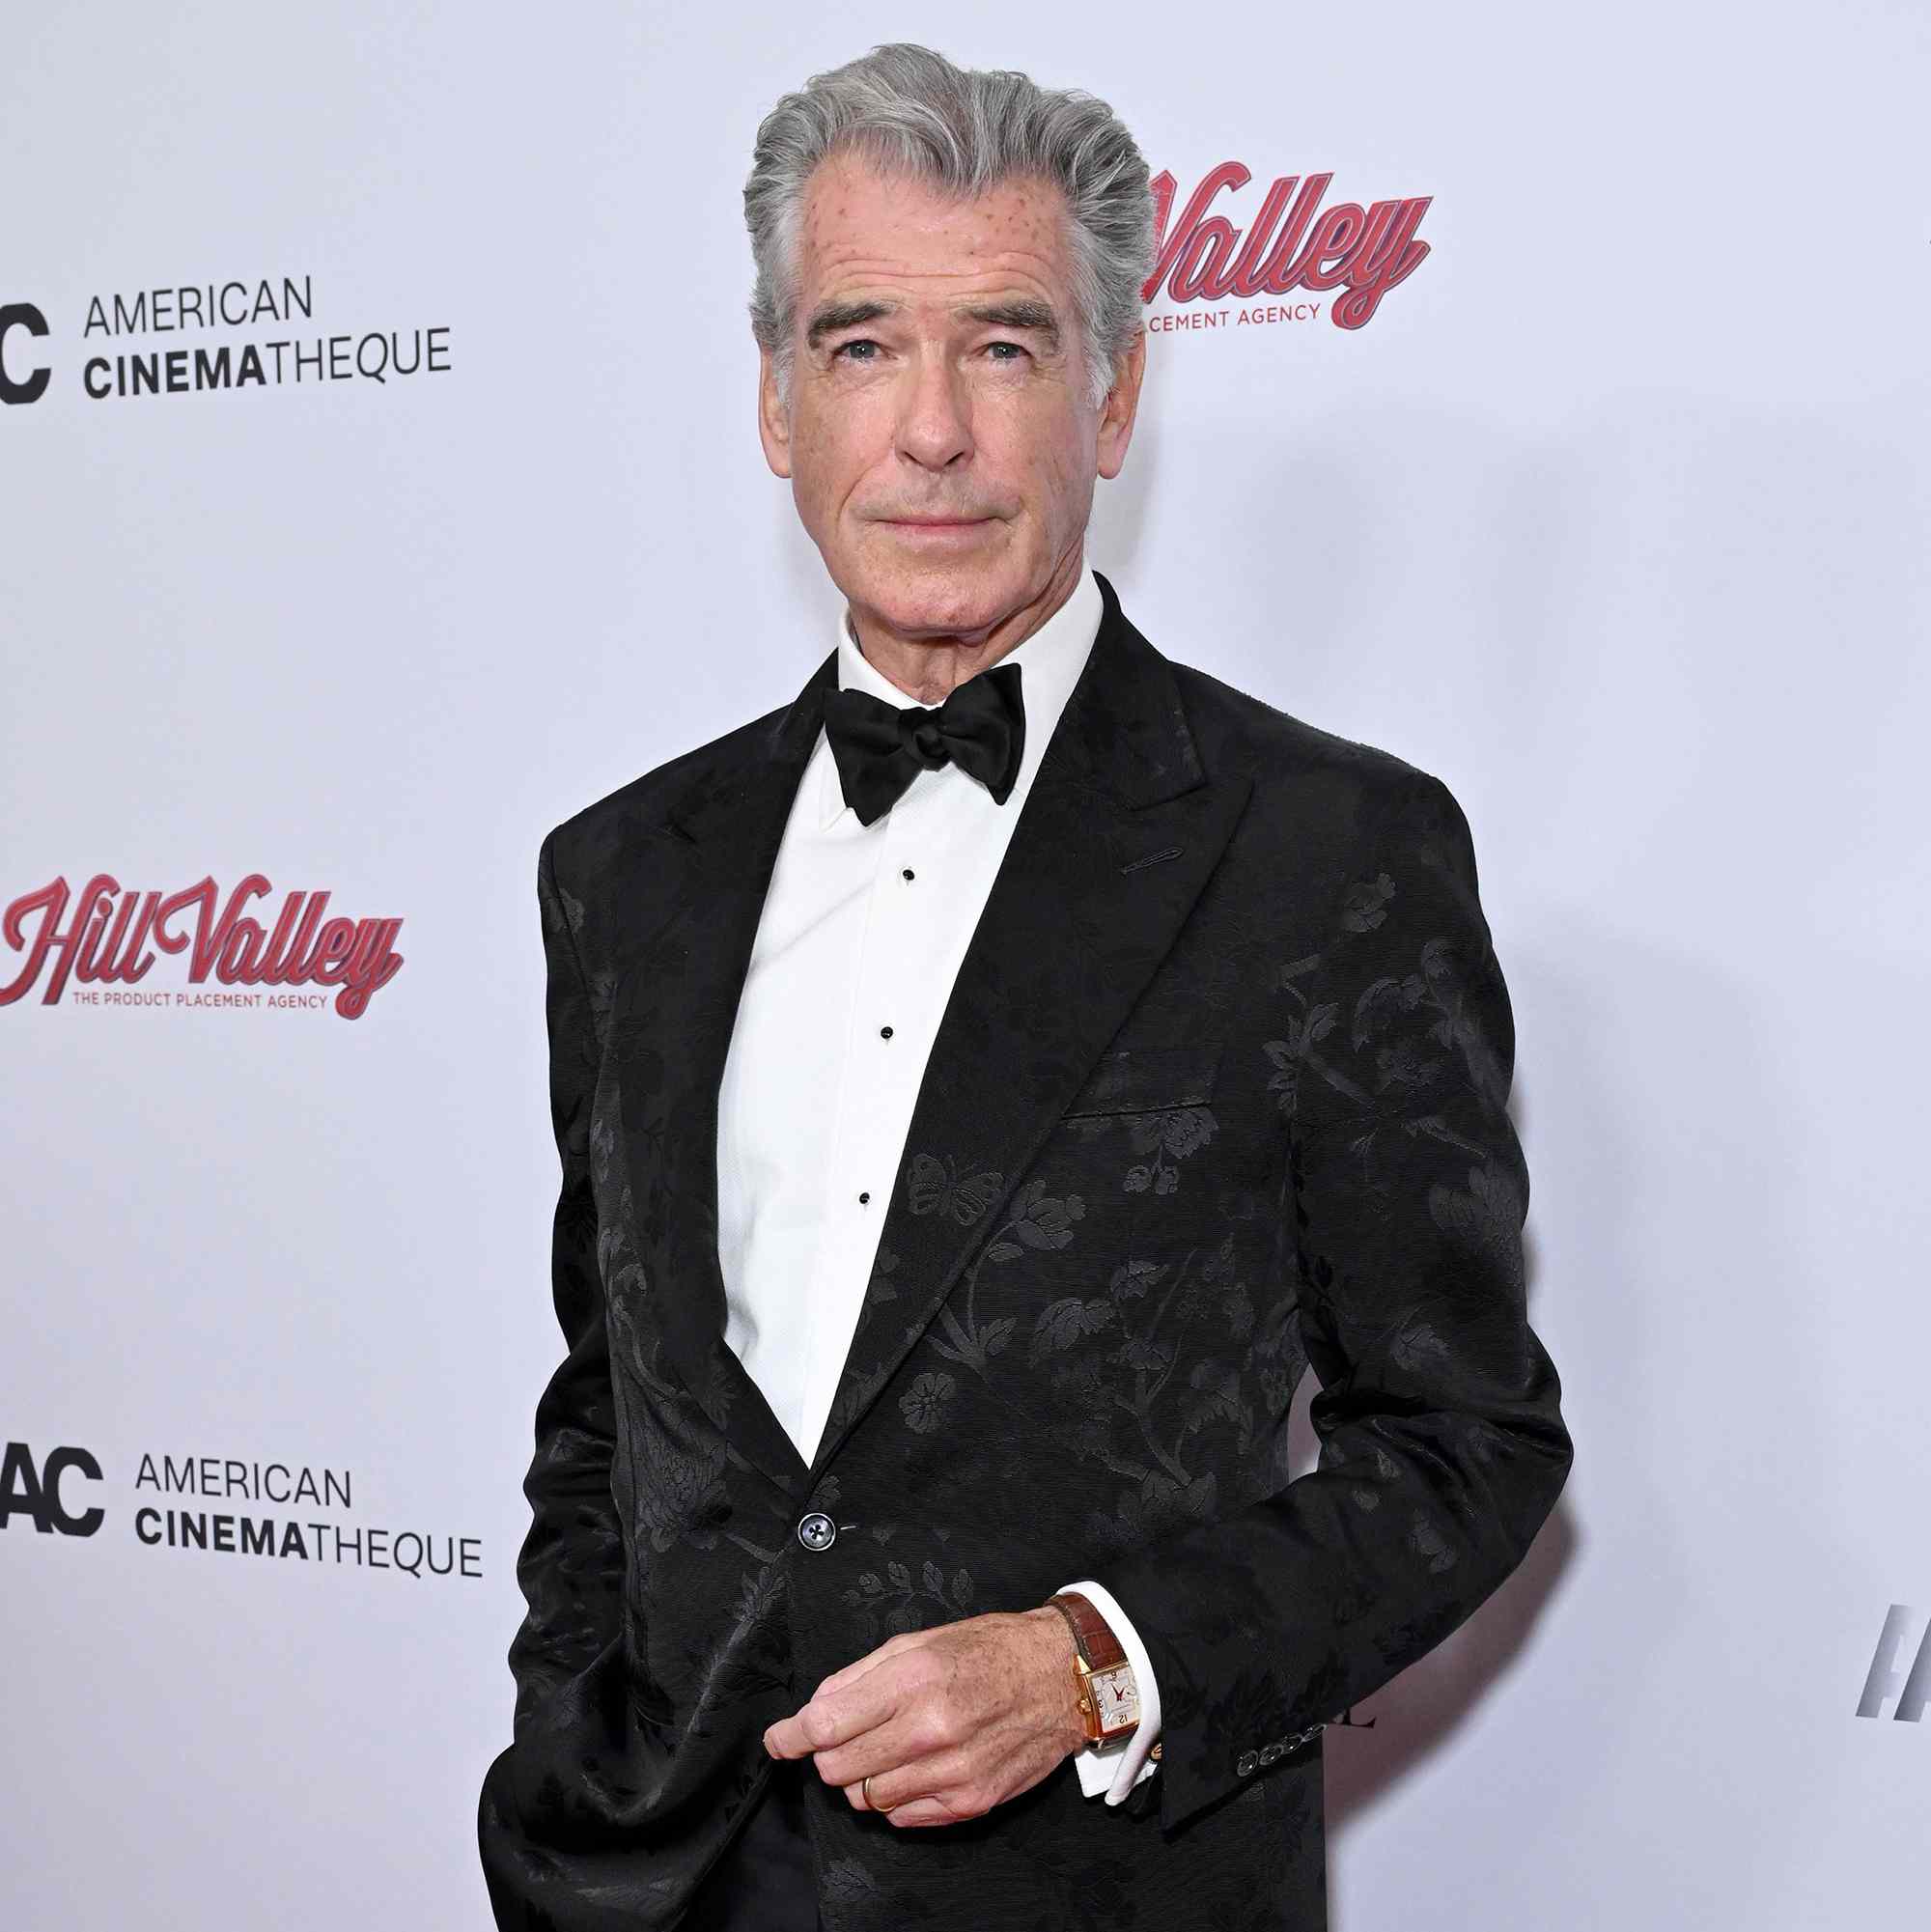 Pierce Brosnan attends the 37th Annual American Cinematheque Awards Honoring Helen Mirren, Kevin Goetz And Screen Engine at The Beverly Hilton